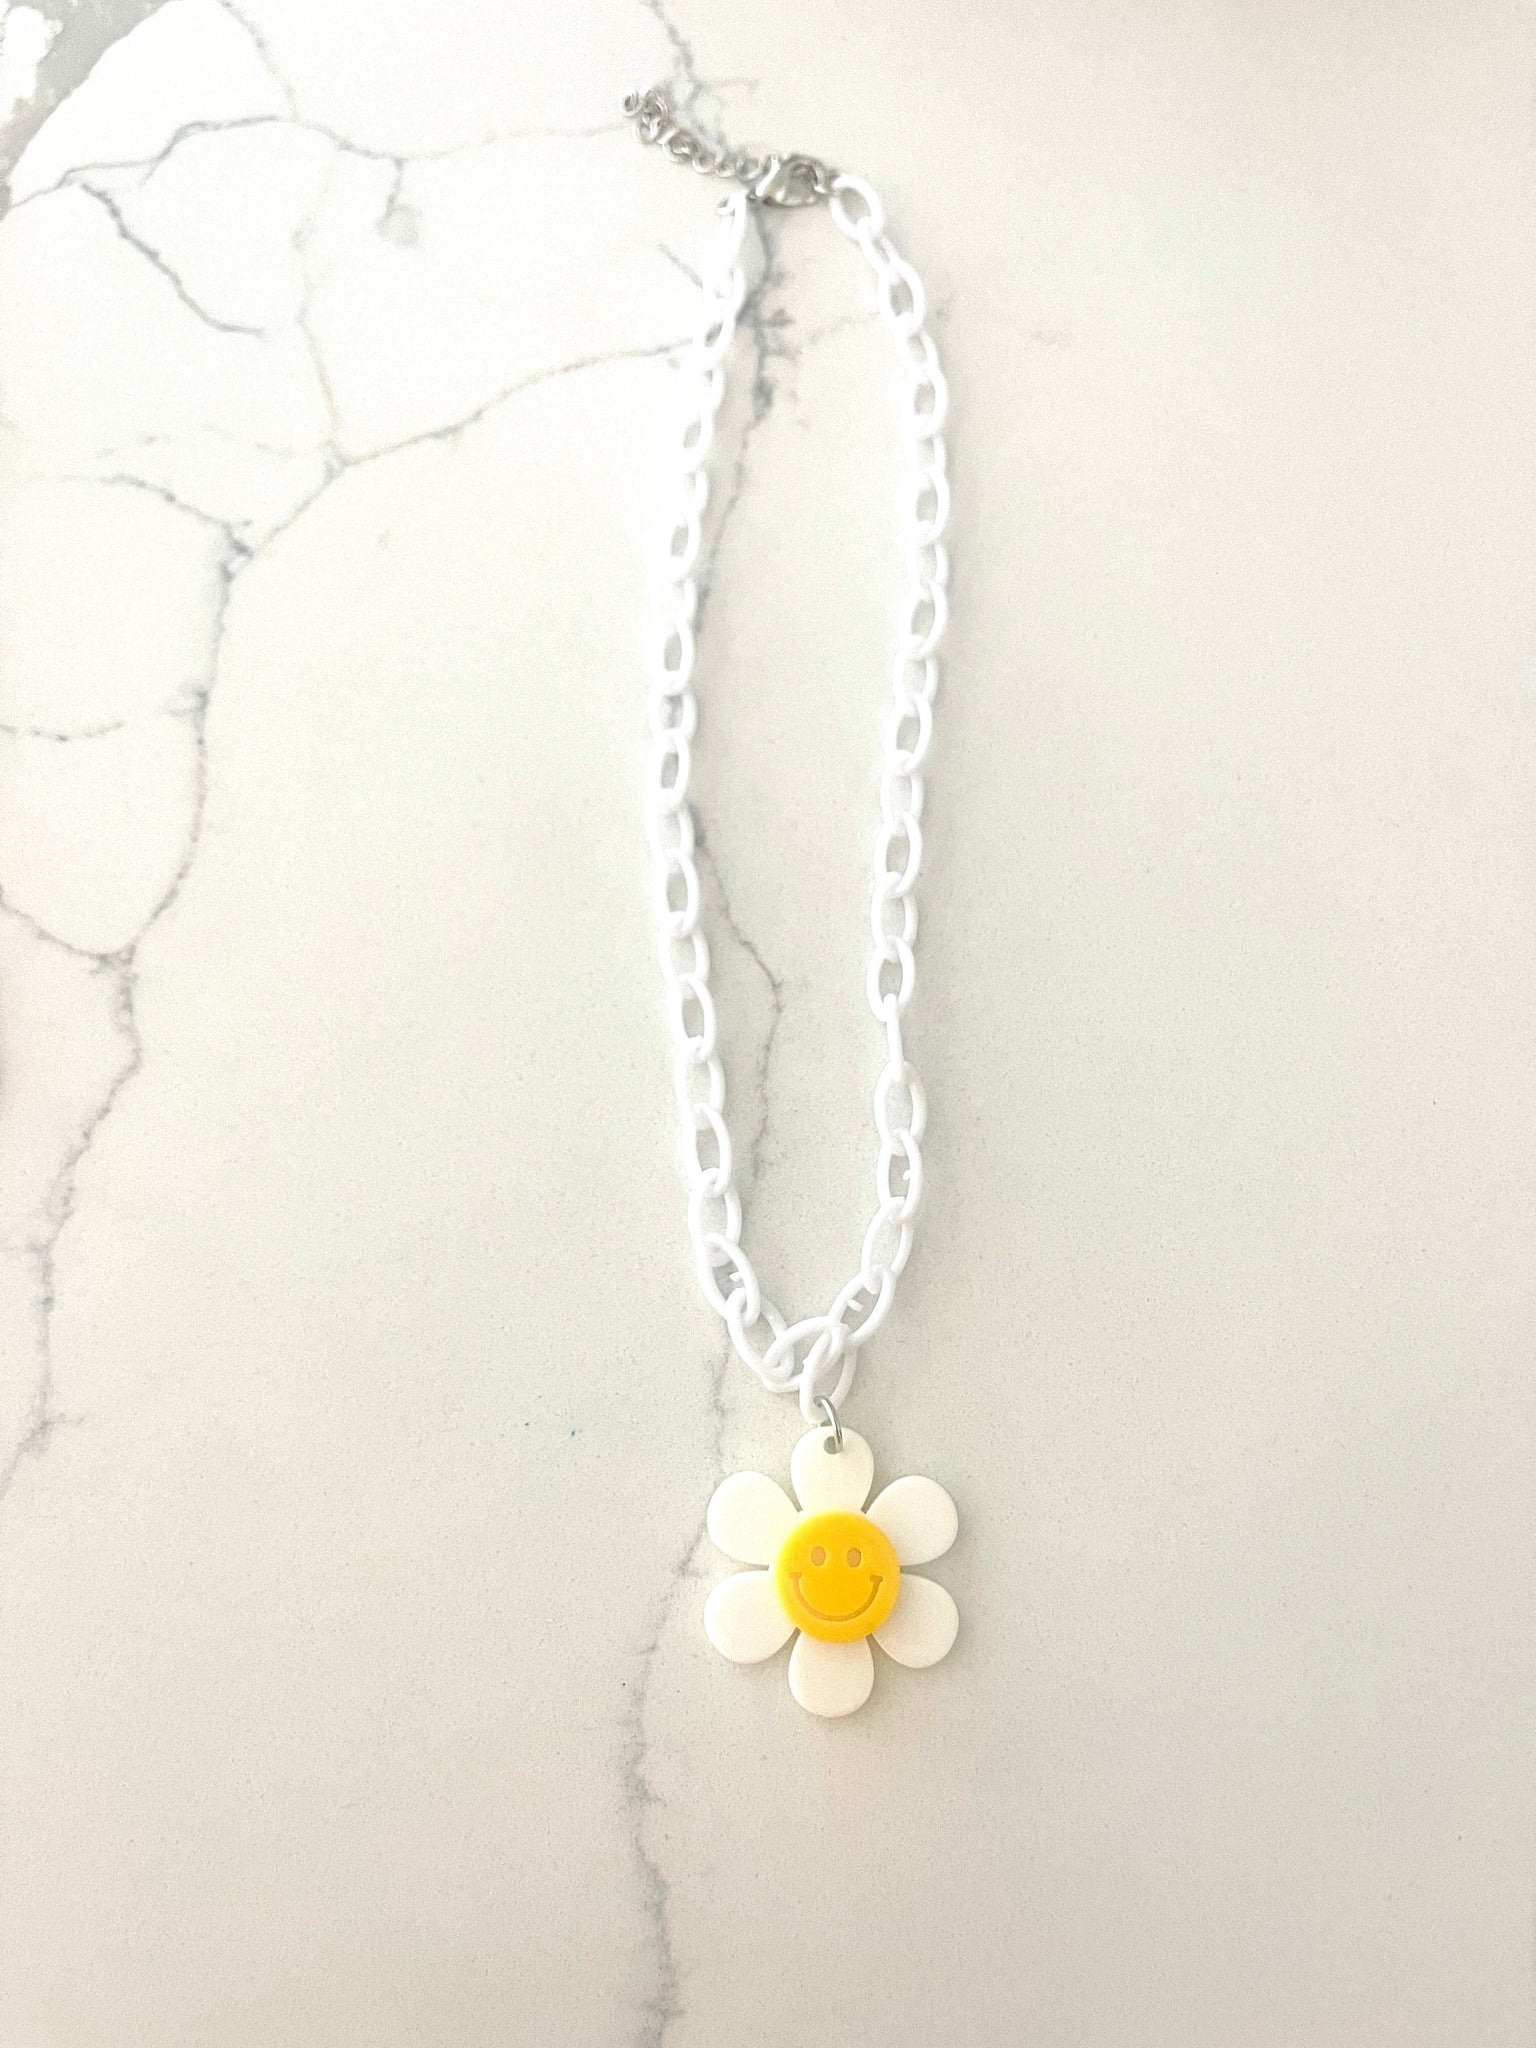 Smiley face flower necklace